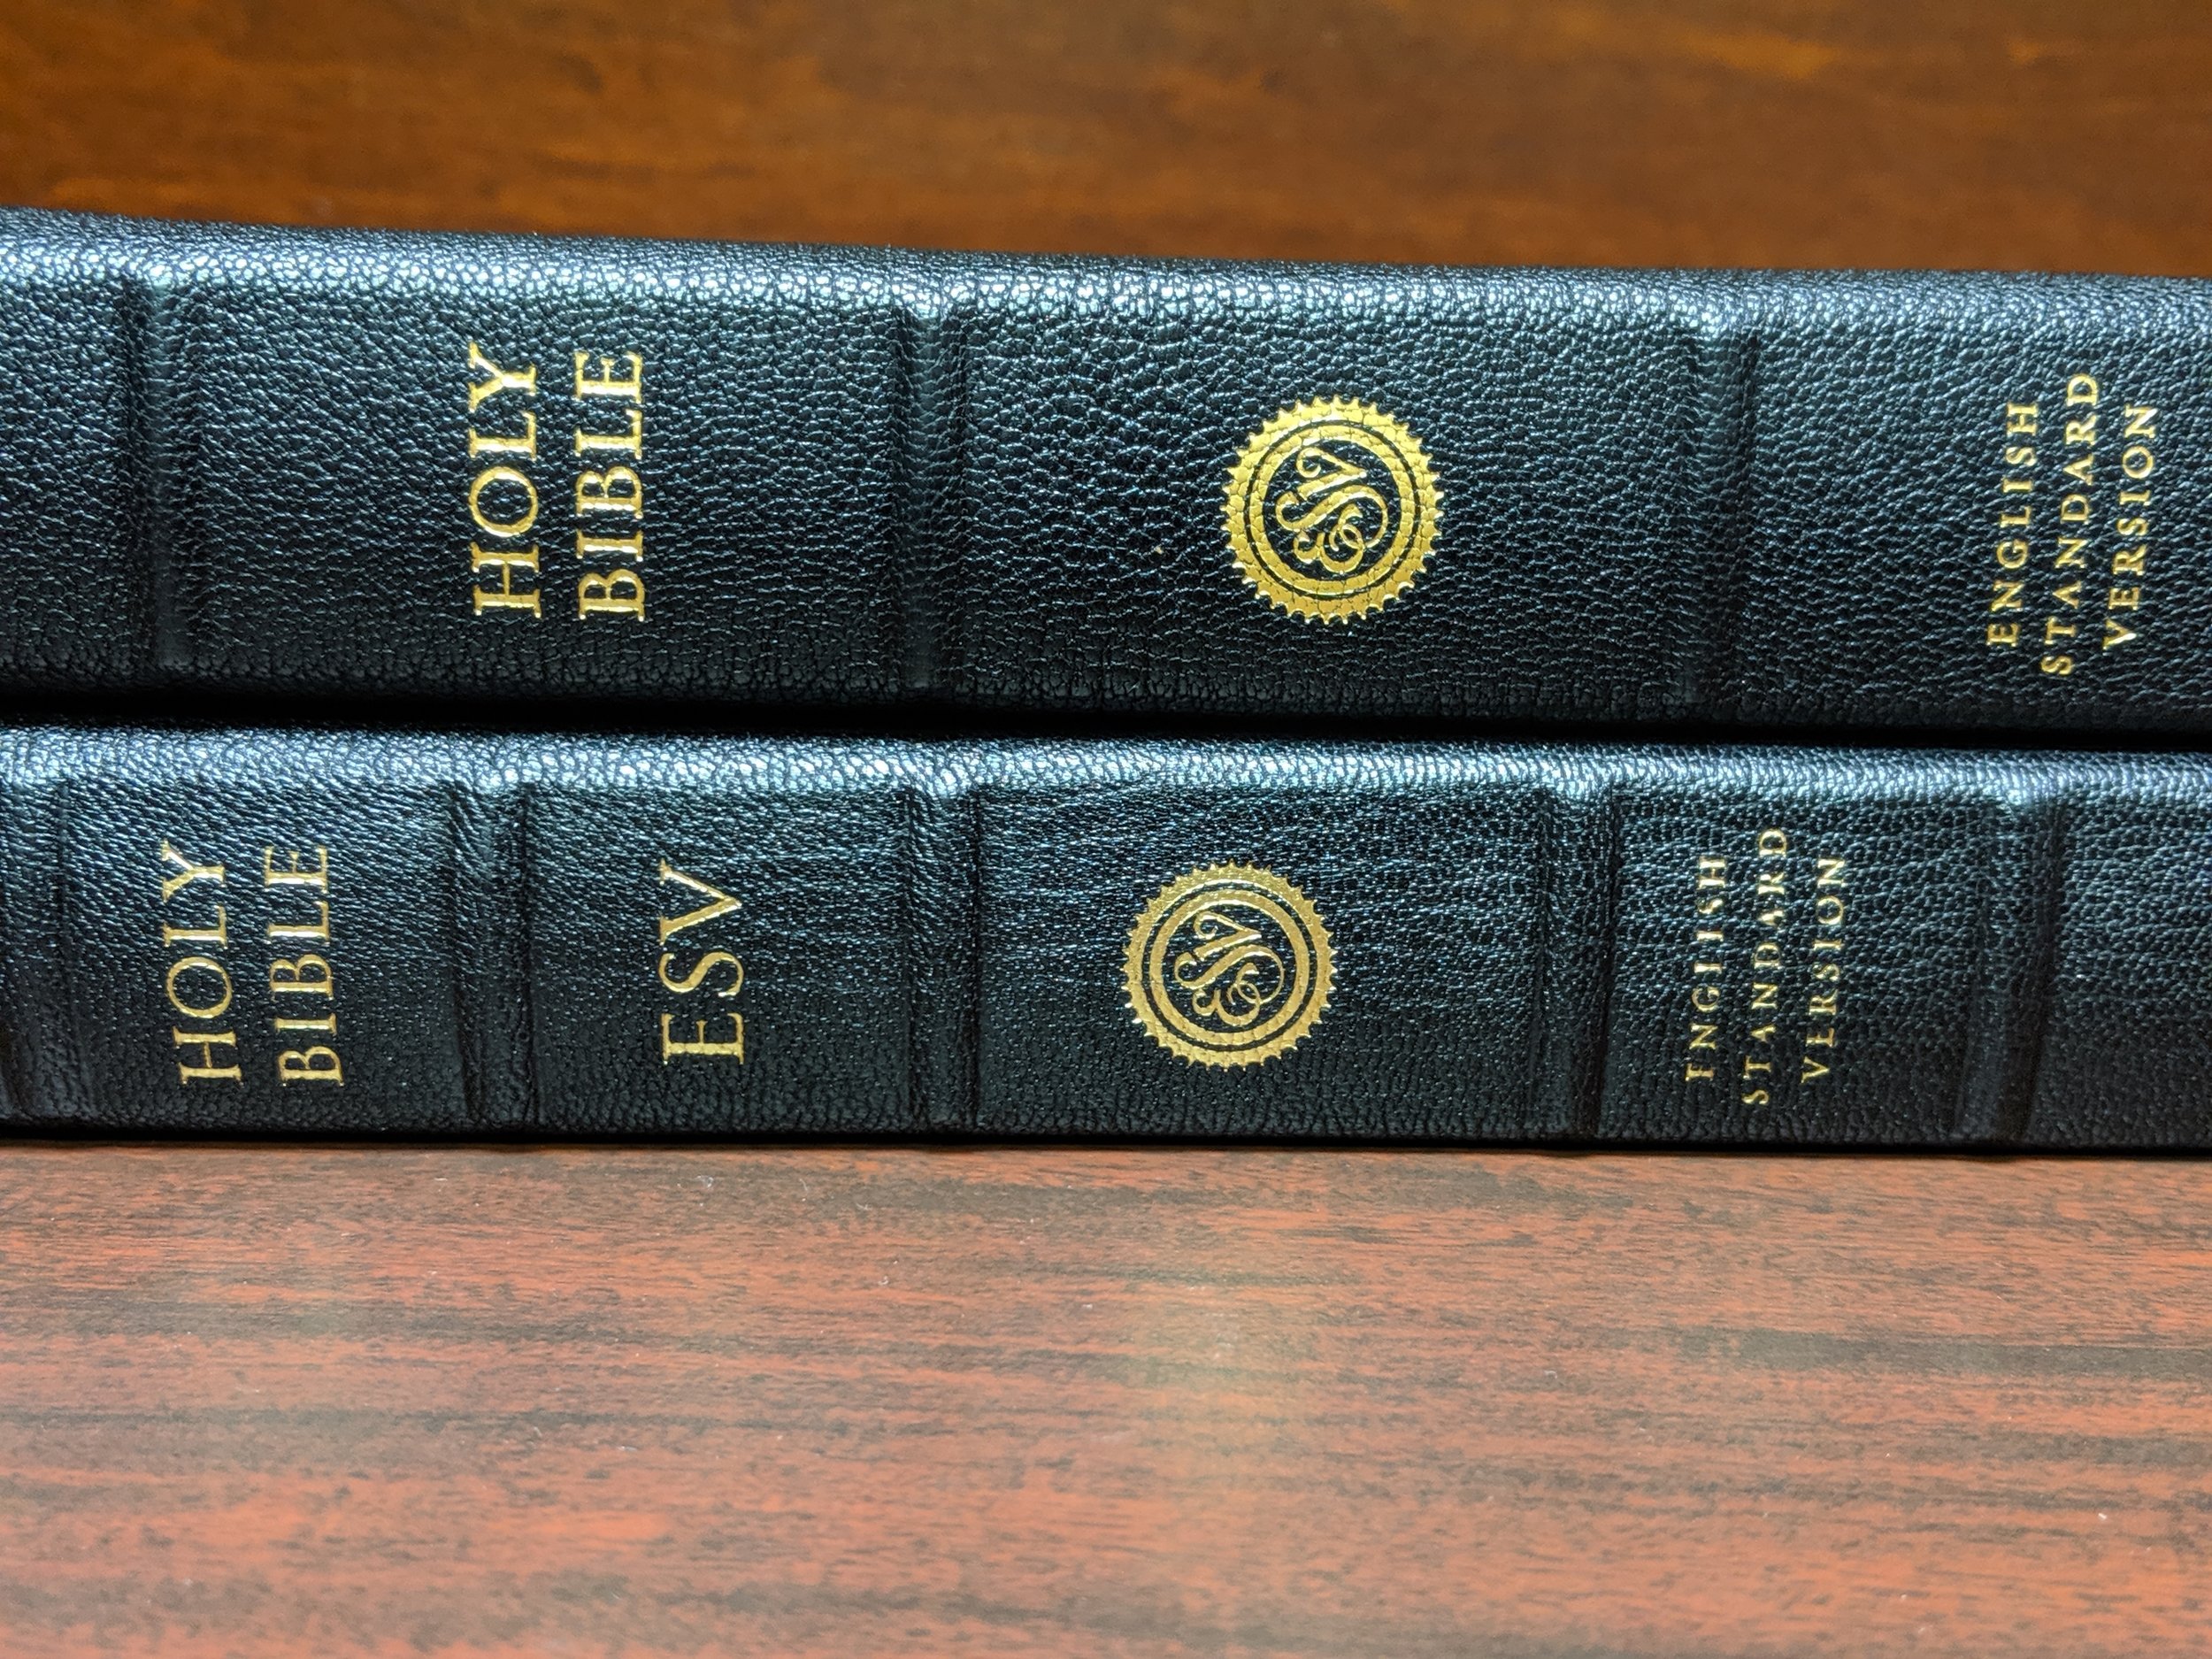  One less ESV reference on the spine of the newer Heirloom Legacy. 